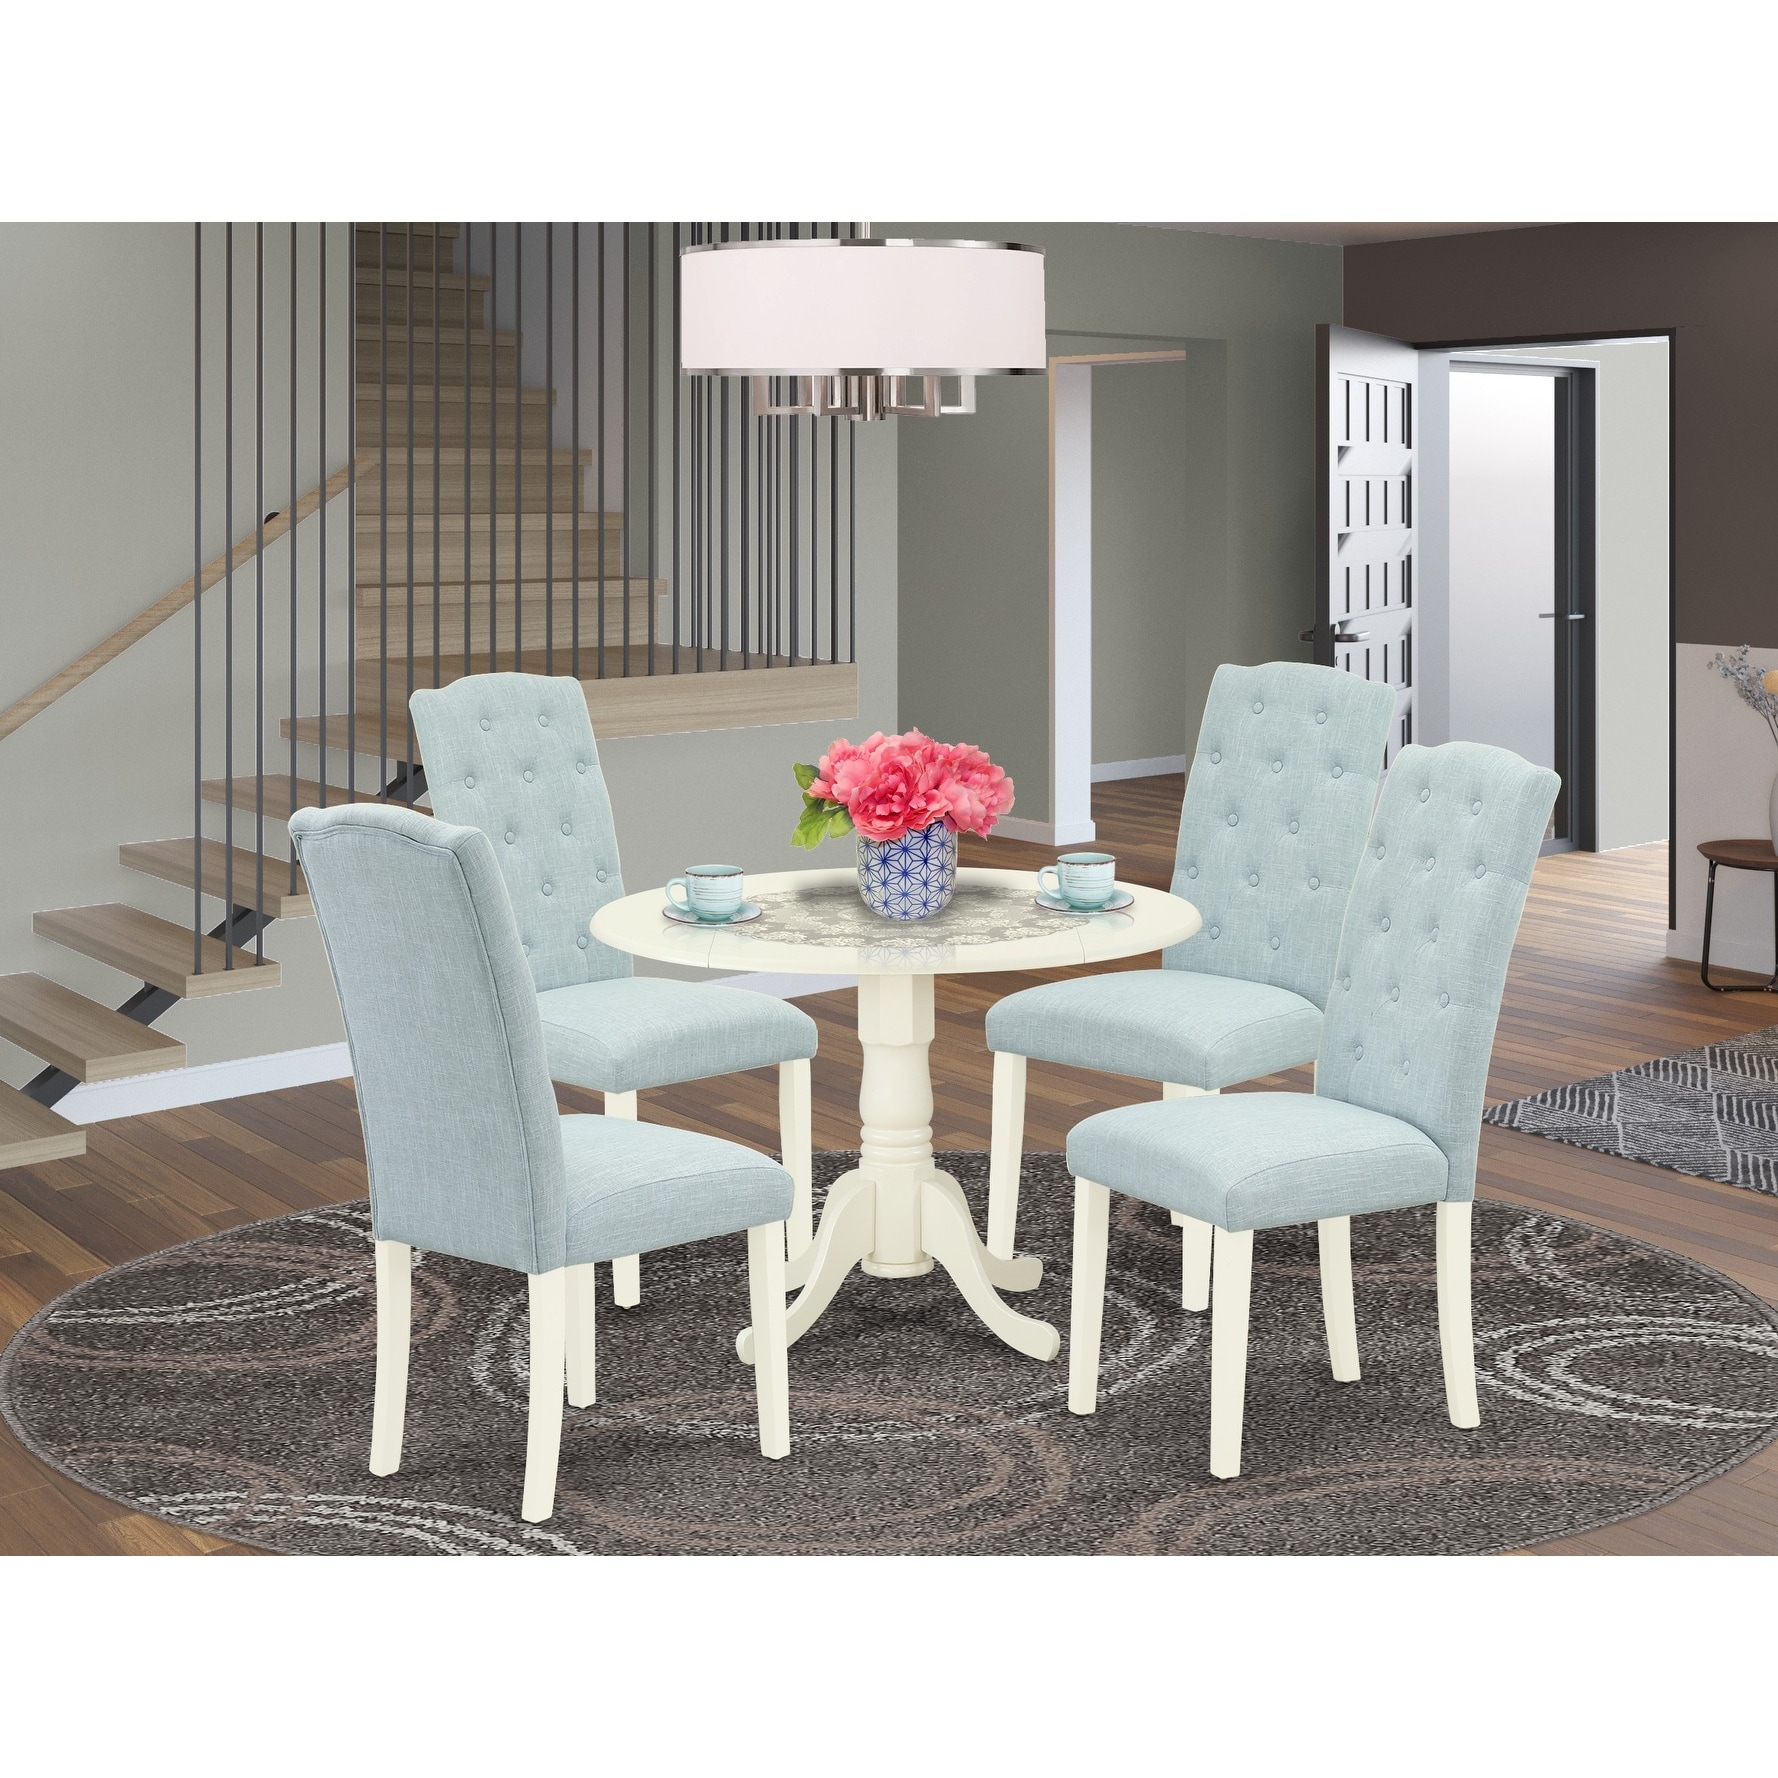 East West Furniture 5 Piece Dining Set Includes A Dining Room Table And 4 Linen Fabric Chairs (finish Options)